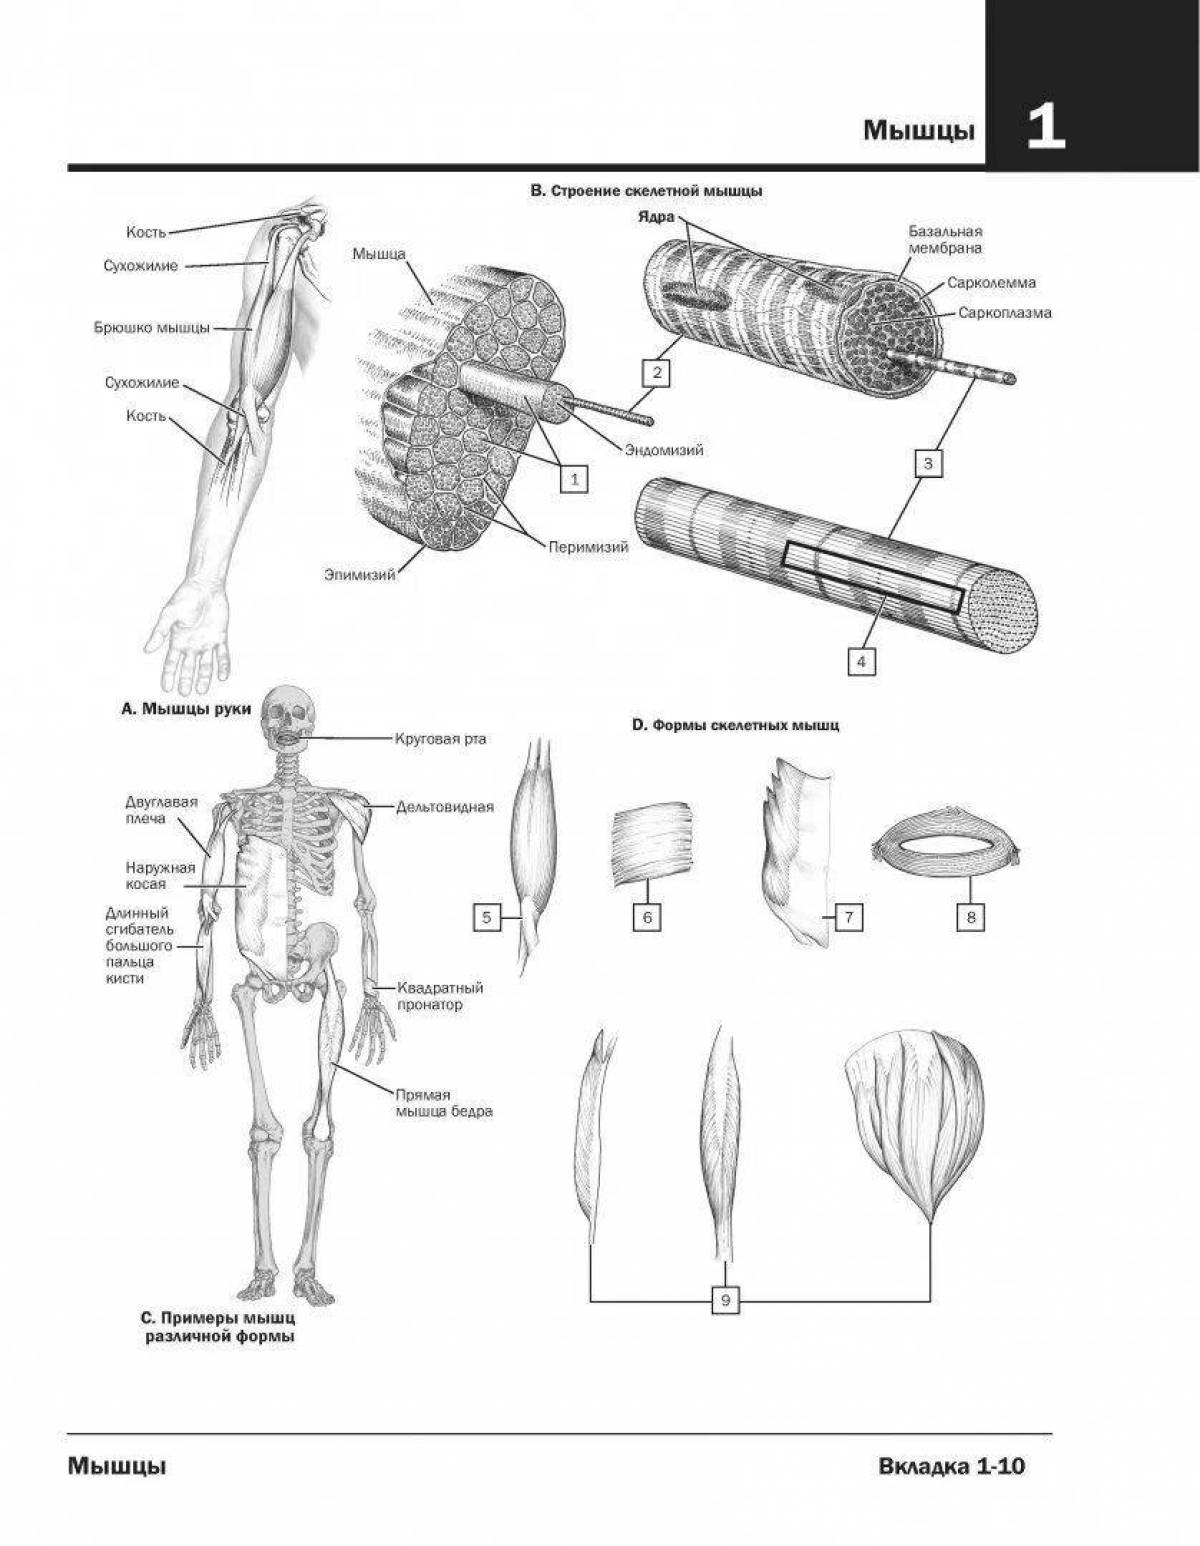 Netter's intriguing anatomy atlas coloring book